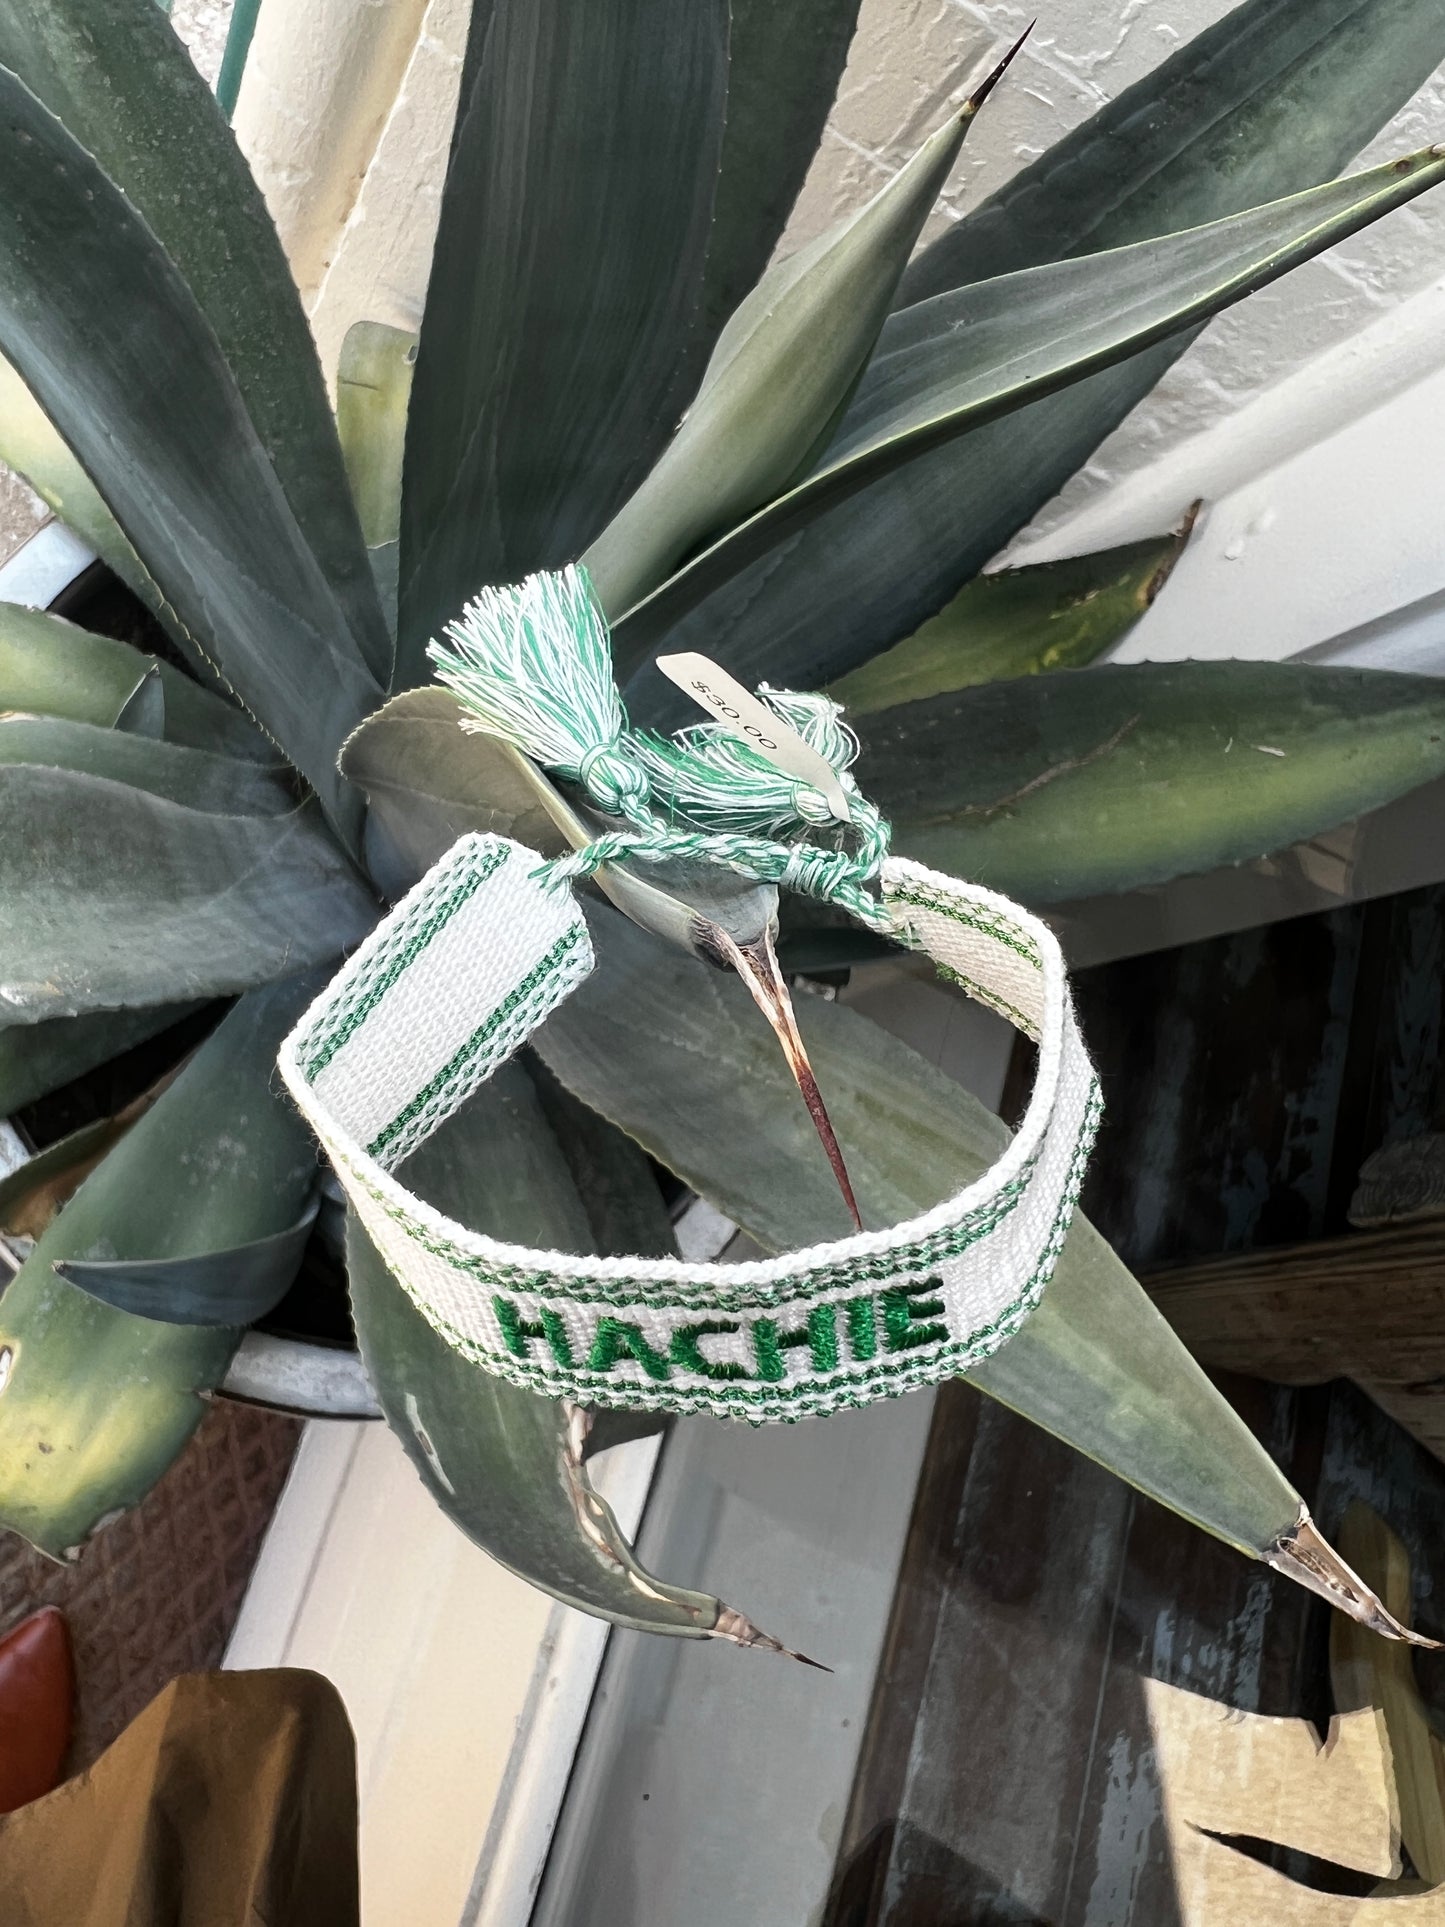 Green and White "Hachie" Embroidered Bracelet